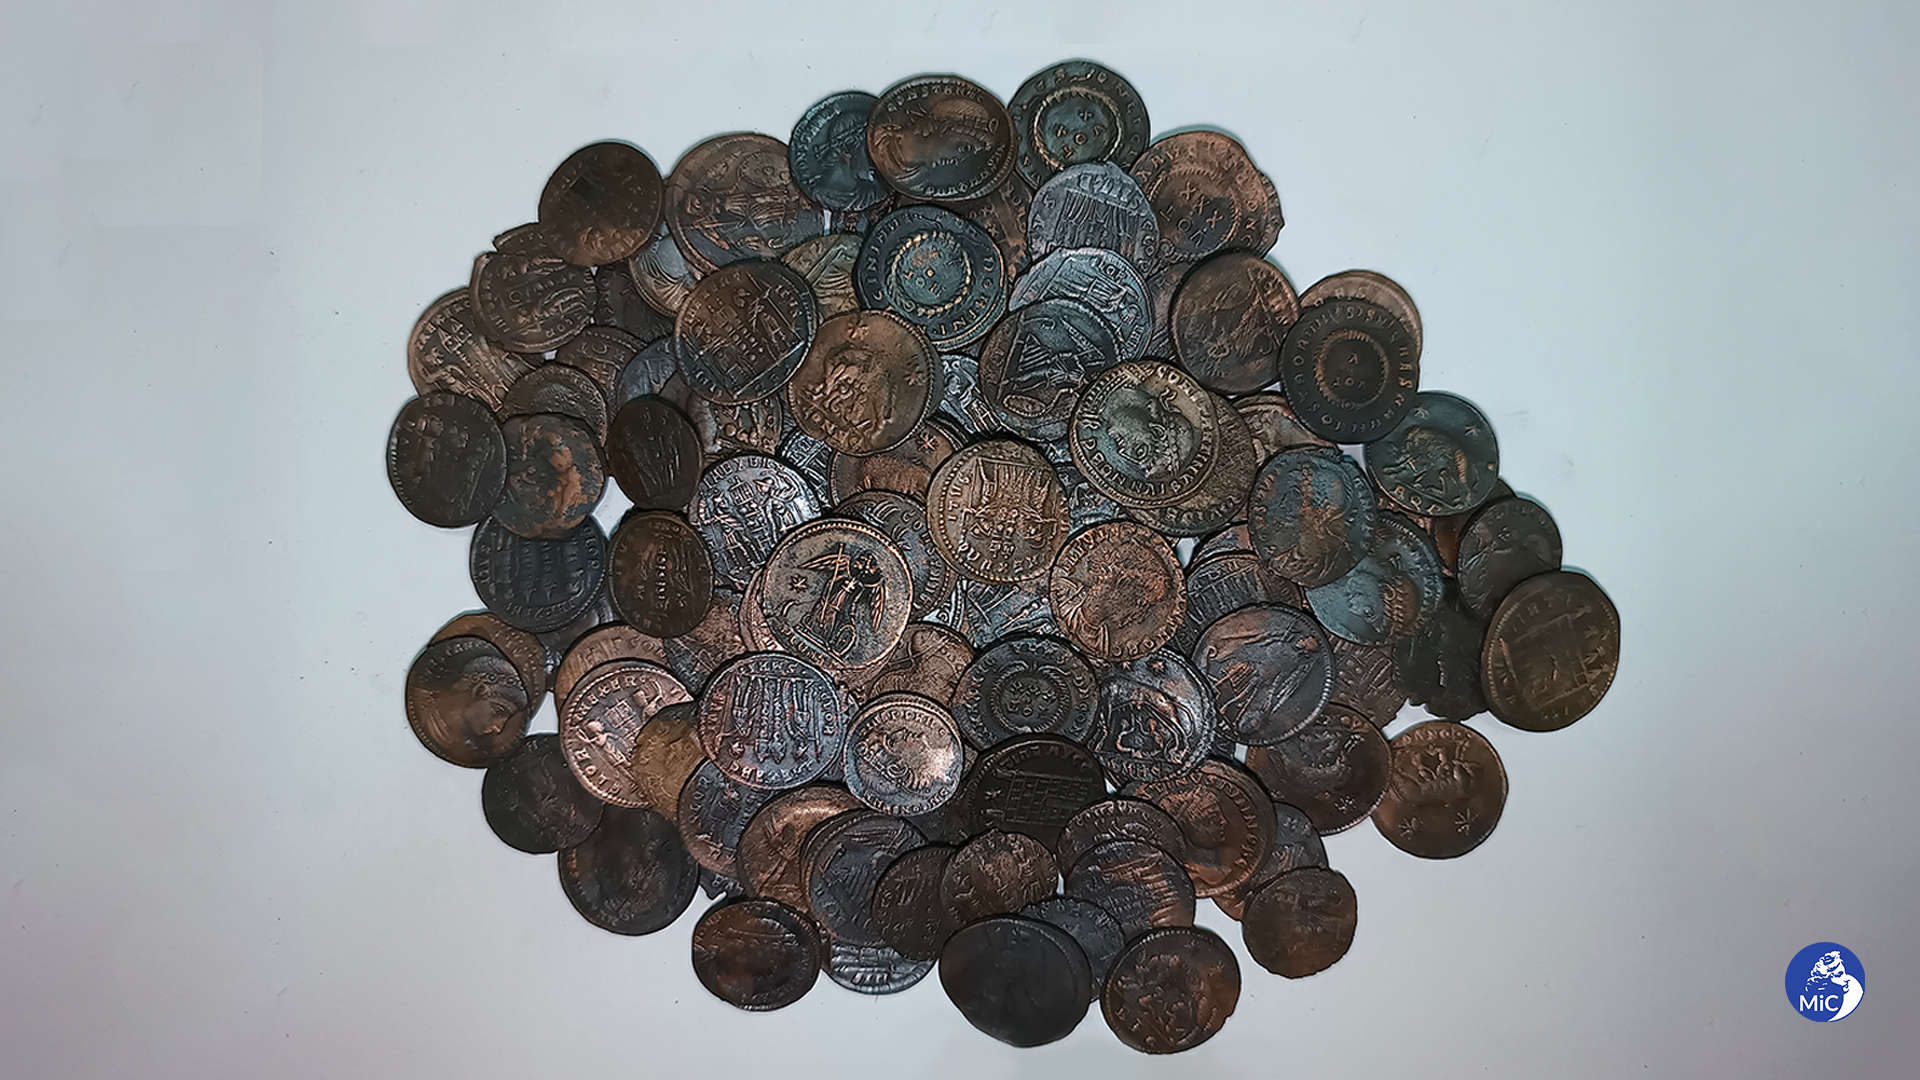 Extraordinary discovery in Sardinia: huge coins of trove Roman treasure well-preserved